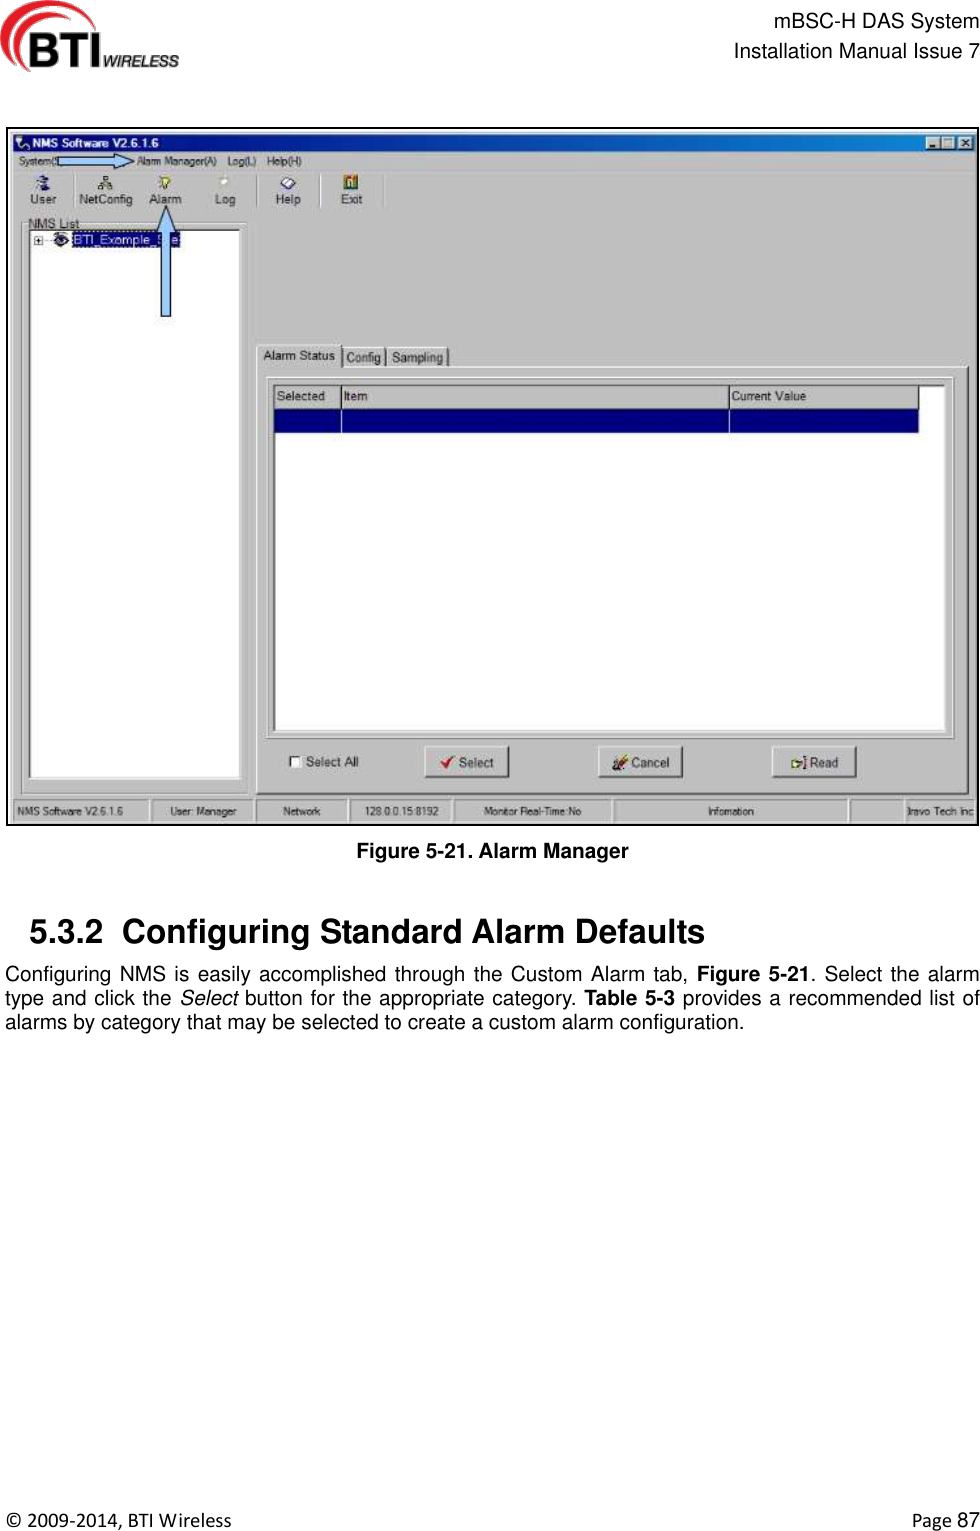                                                   mBSC-H DAS System   Installation Manual Issue 7  ©  2009-2014, BTI Wireless    Page 87   Figure 5-21. Alarm Manager   5.3.2  Configuring Standard Alarm Defaults Configuring NMS is easily accomplished through the Custom Alarm tab, Figure 5-21. Select the alarm type and click the Select button for the appropriate category. Table 5-3 provides a recommended list of alarms by category that may be selected to create a custom alarm configuration.  